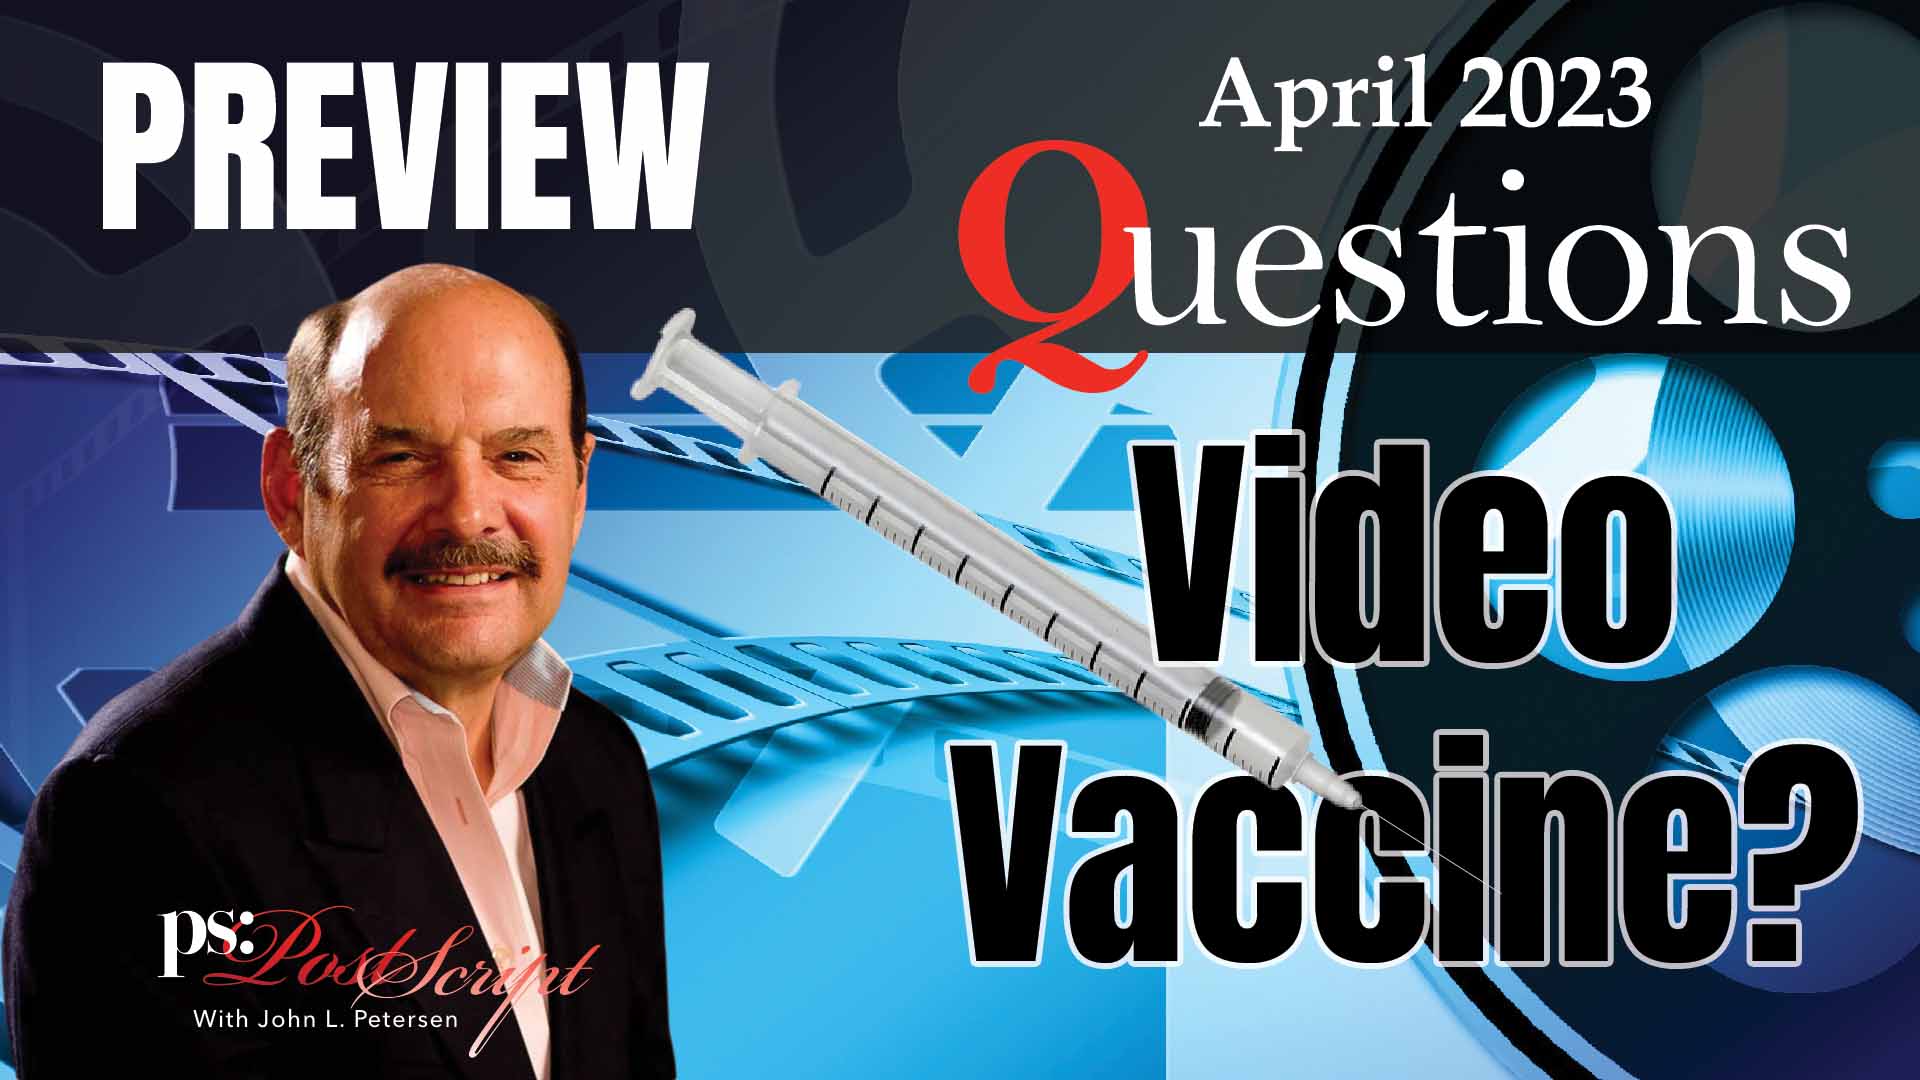 April 2023 Preview Questions with John Petersen